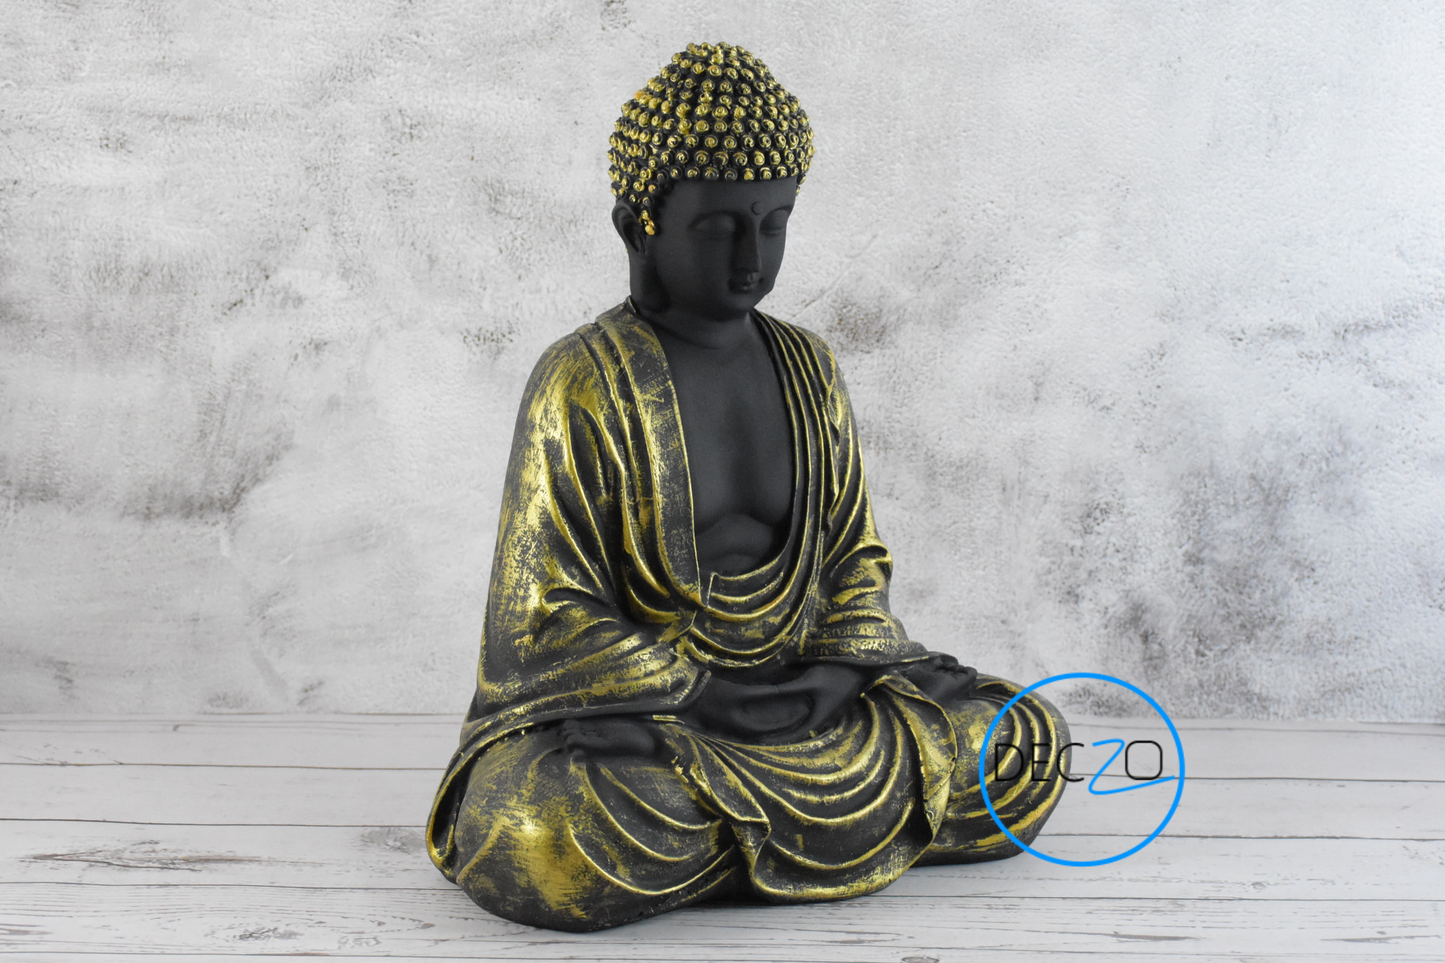 Hand Carved Sitting Buddha -35 CM, Black and Golden